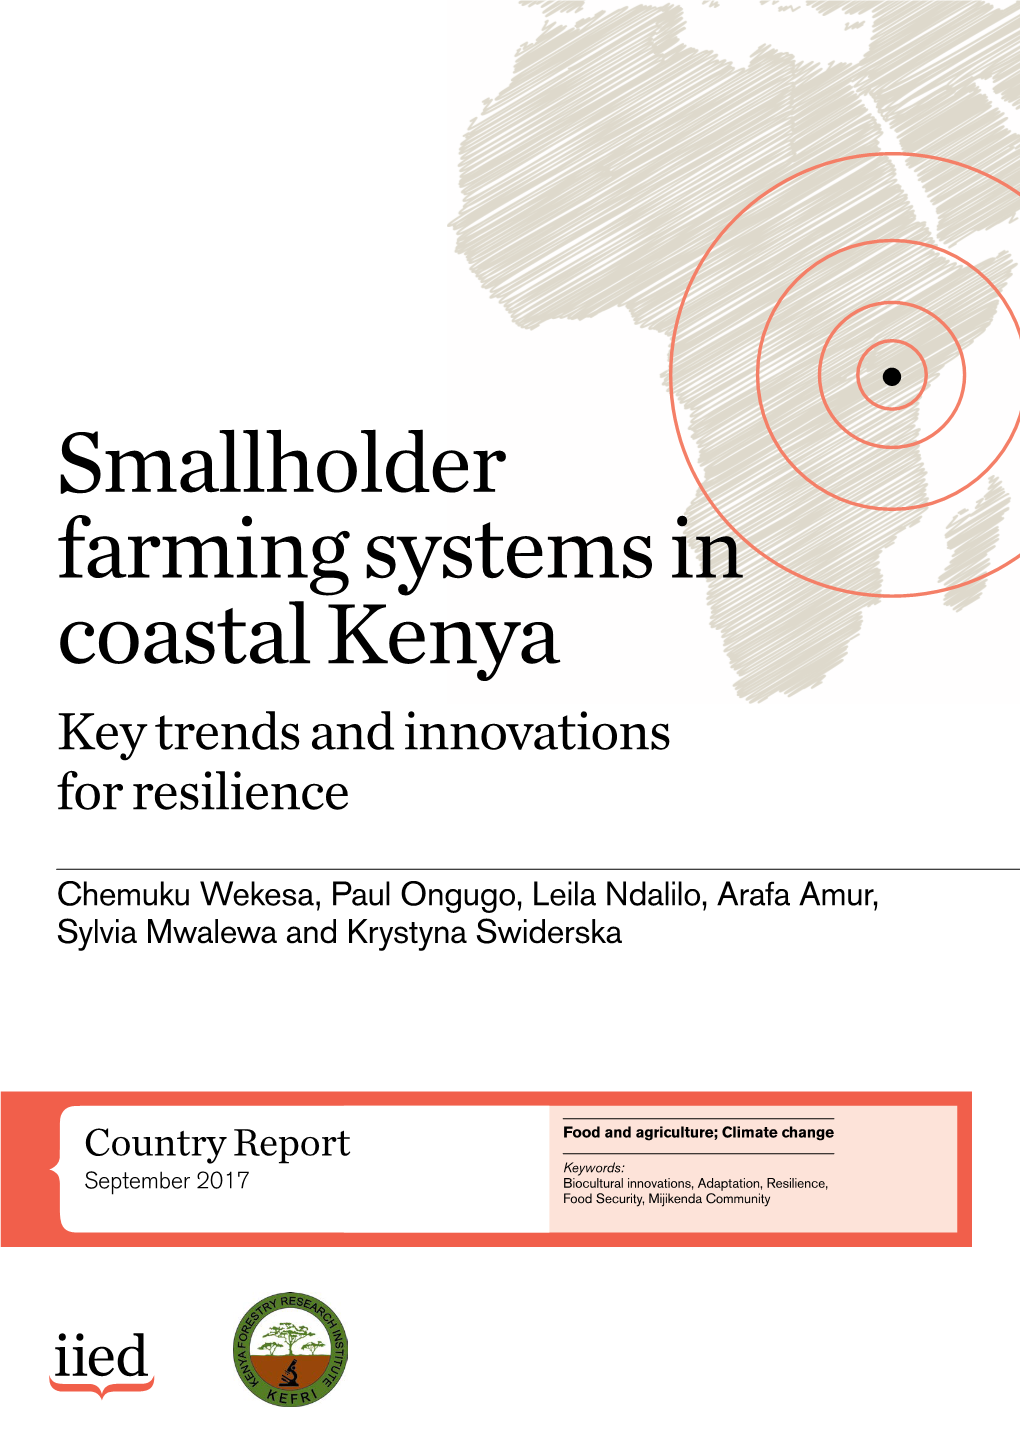 Smallholder Farming Systems in Coastal Kenya Key Trends and Innovations for Resilience